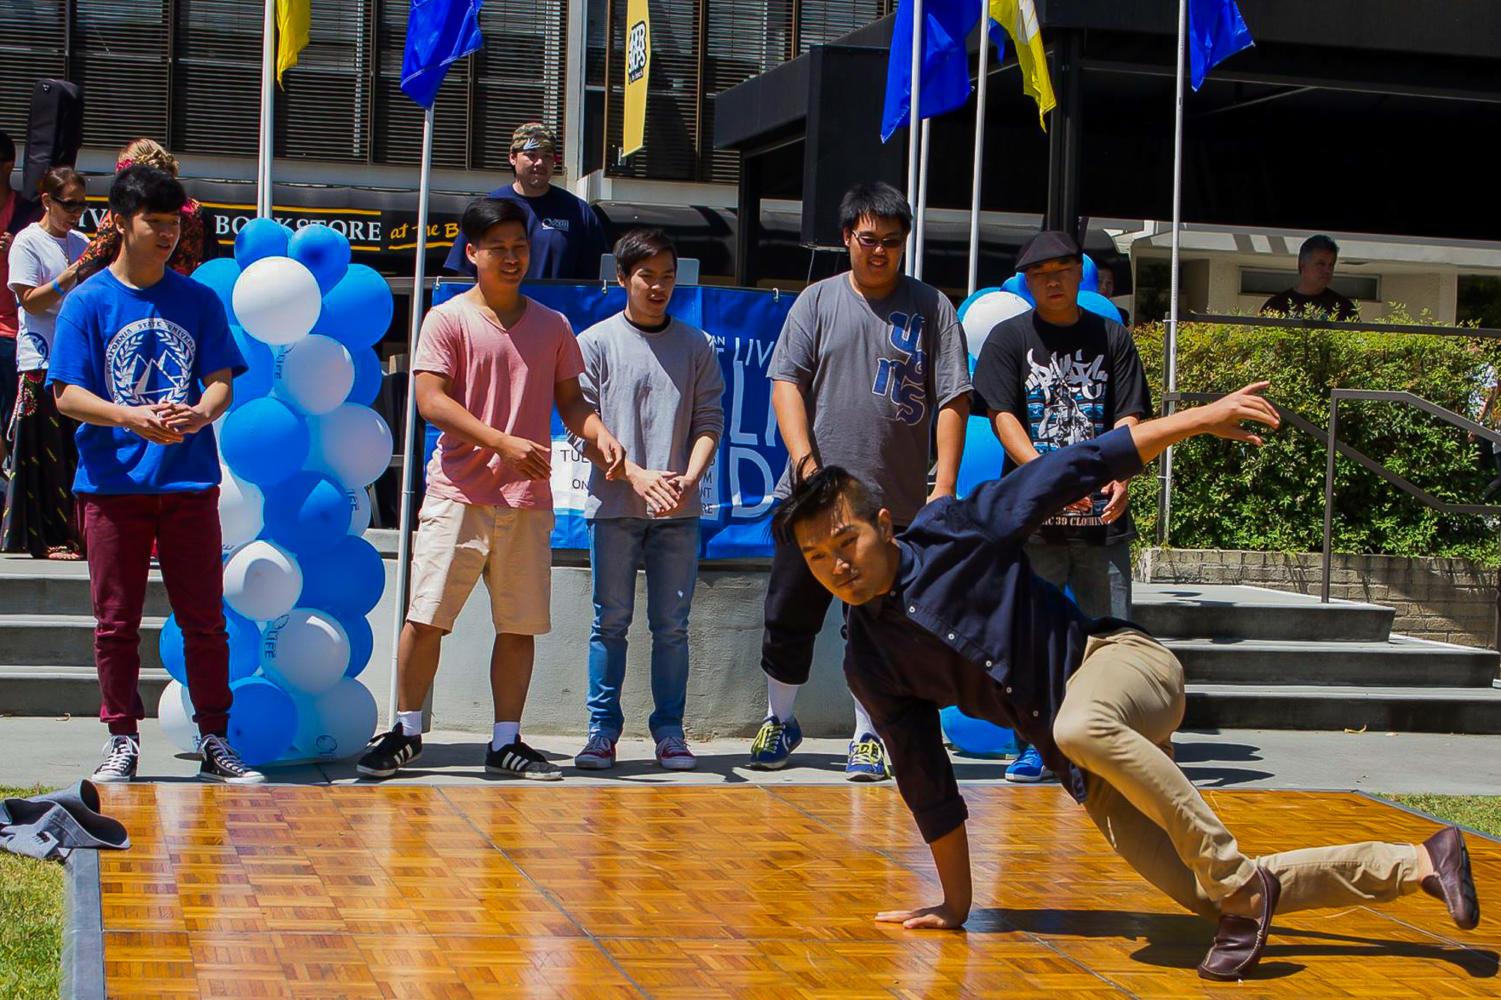 A student breakdances during Project OCEAN’s Live Your Life Day 2015. The event will return to campus April 10 with free massages, support animals and other activities on the Speaker’s Platform lawn from 11 a.m. to 2 p.m.